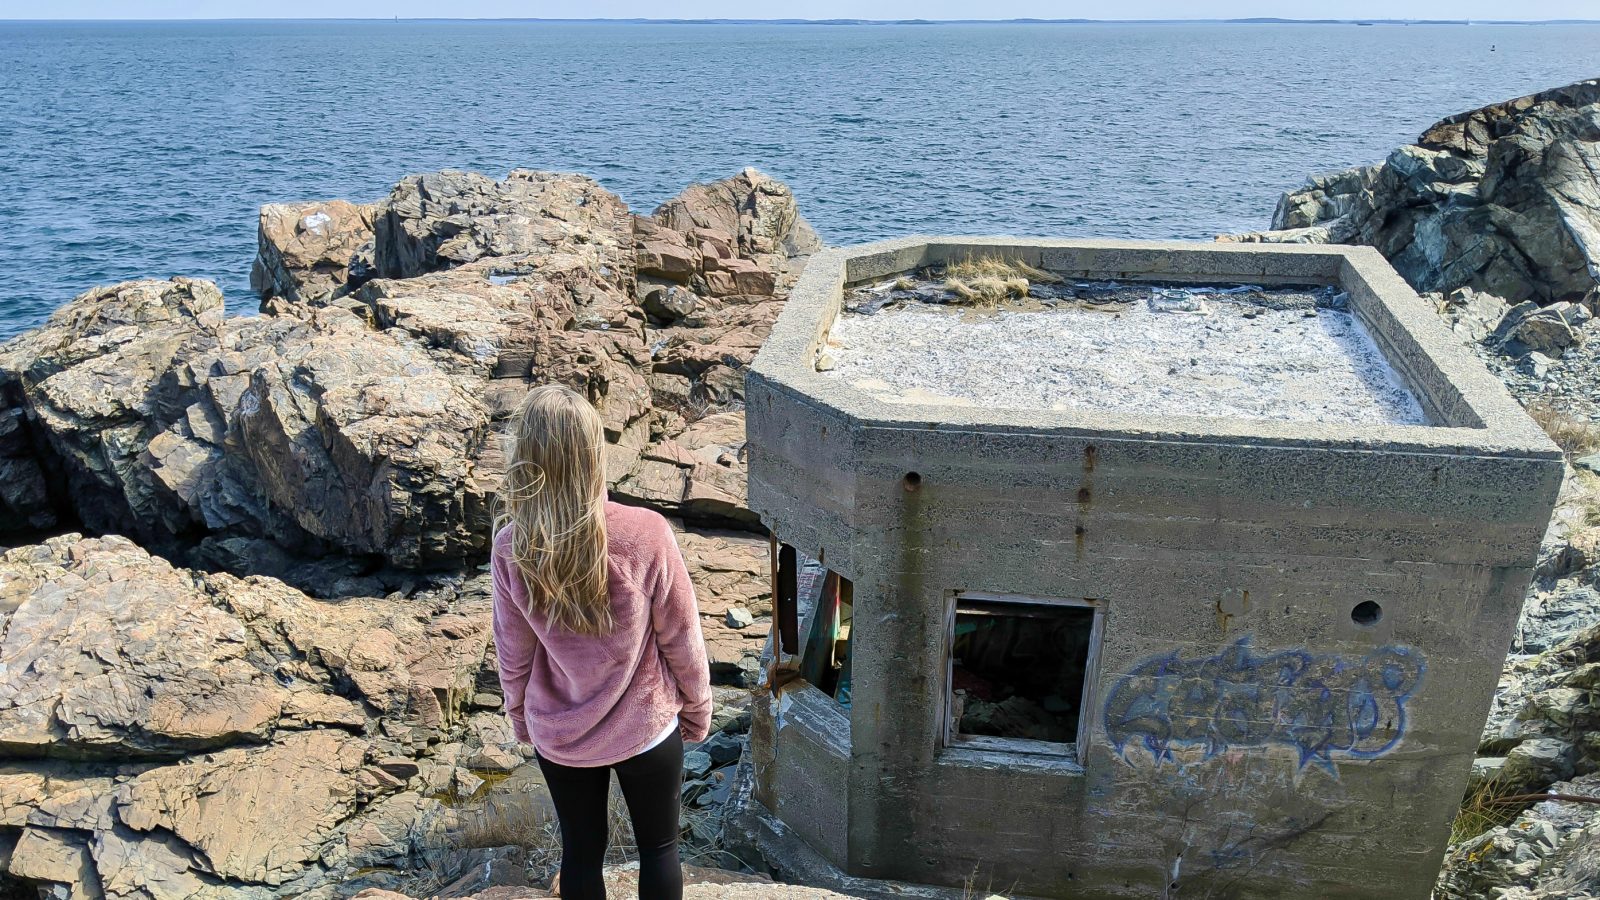 WWII Sites in Massachusetts--east to west, Cape Cod & the islands / WWII museums in Massachusetts, WWII memorials in Massachusetts / WWII battleships, tanks, and abandoned forts, and more. Boston World War II sites and memorials.